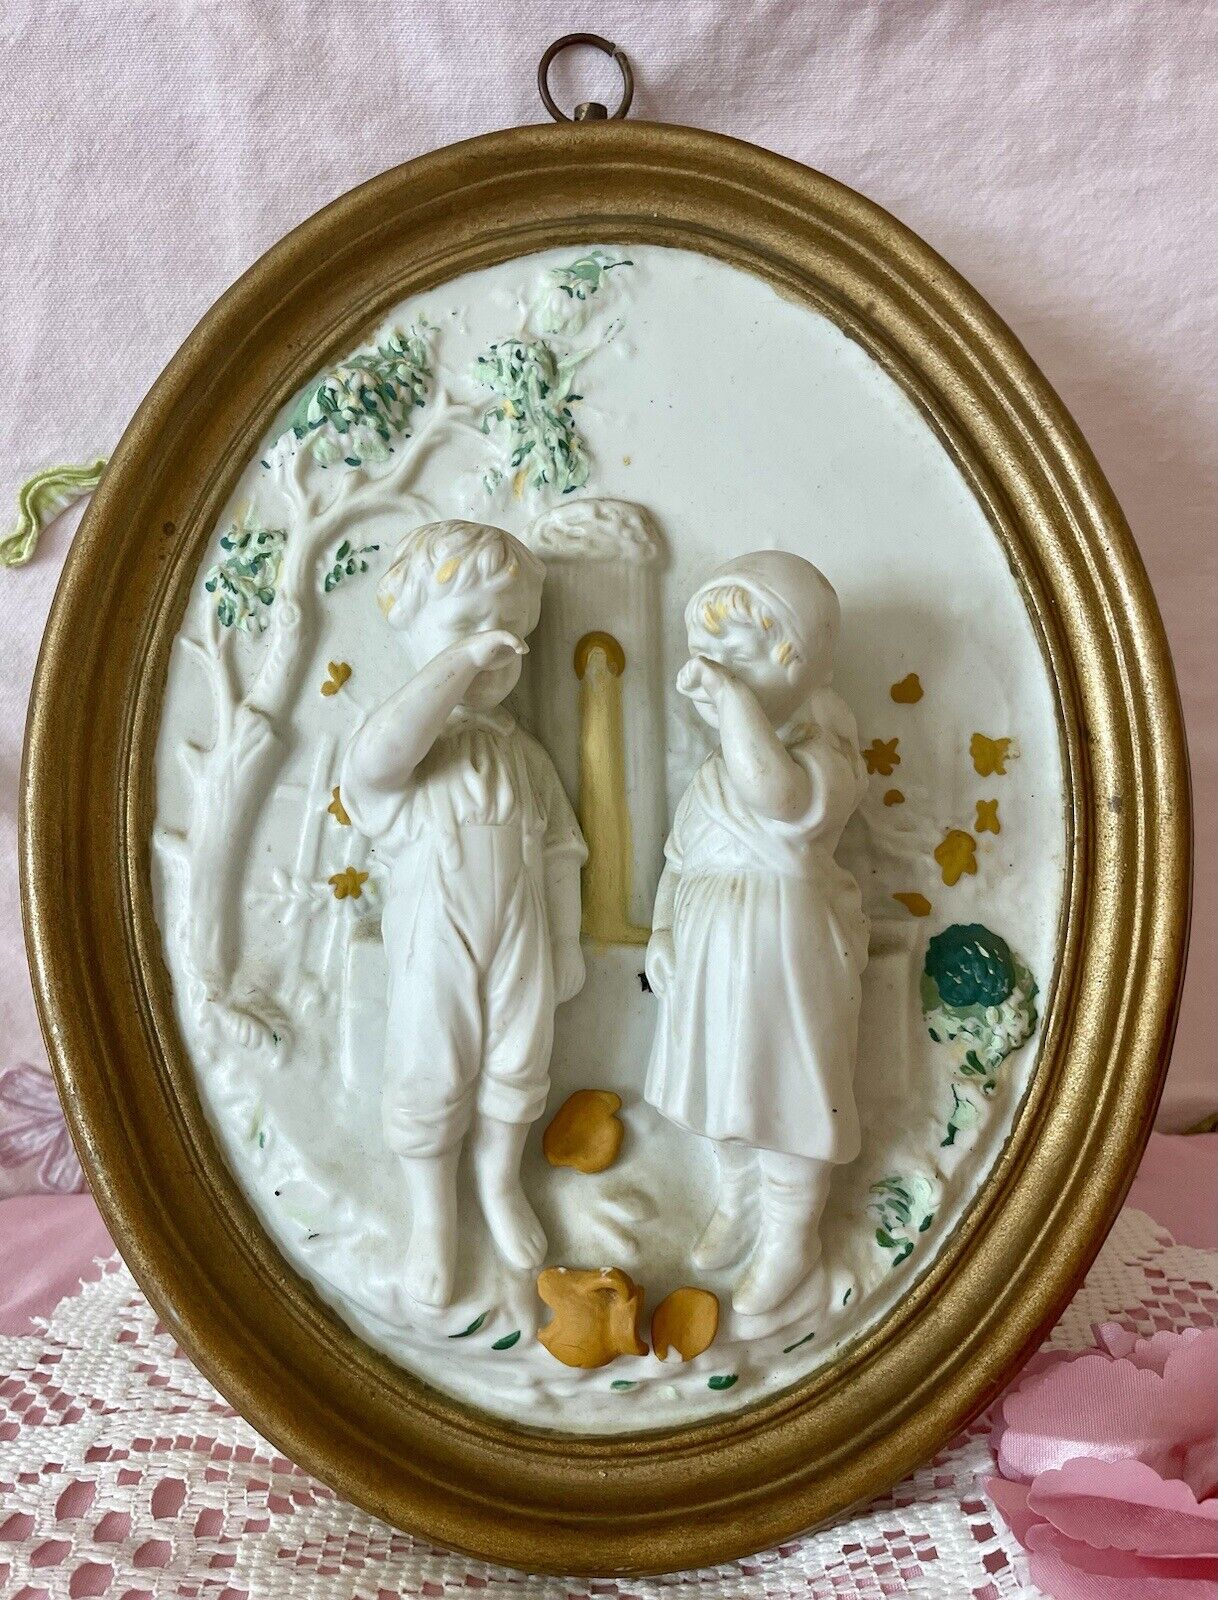 ANTIQUE GERMAN PORCELAIN WALL PLAQUE 1850-1880 2 Crying Children. Raised Relief